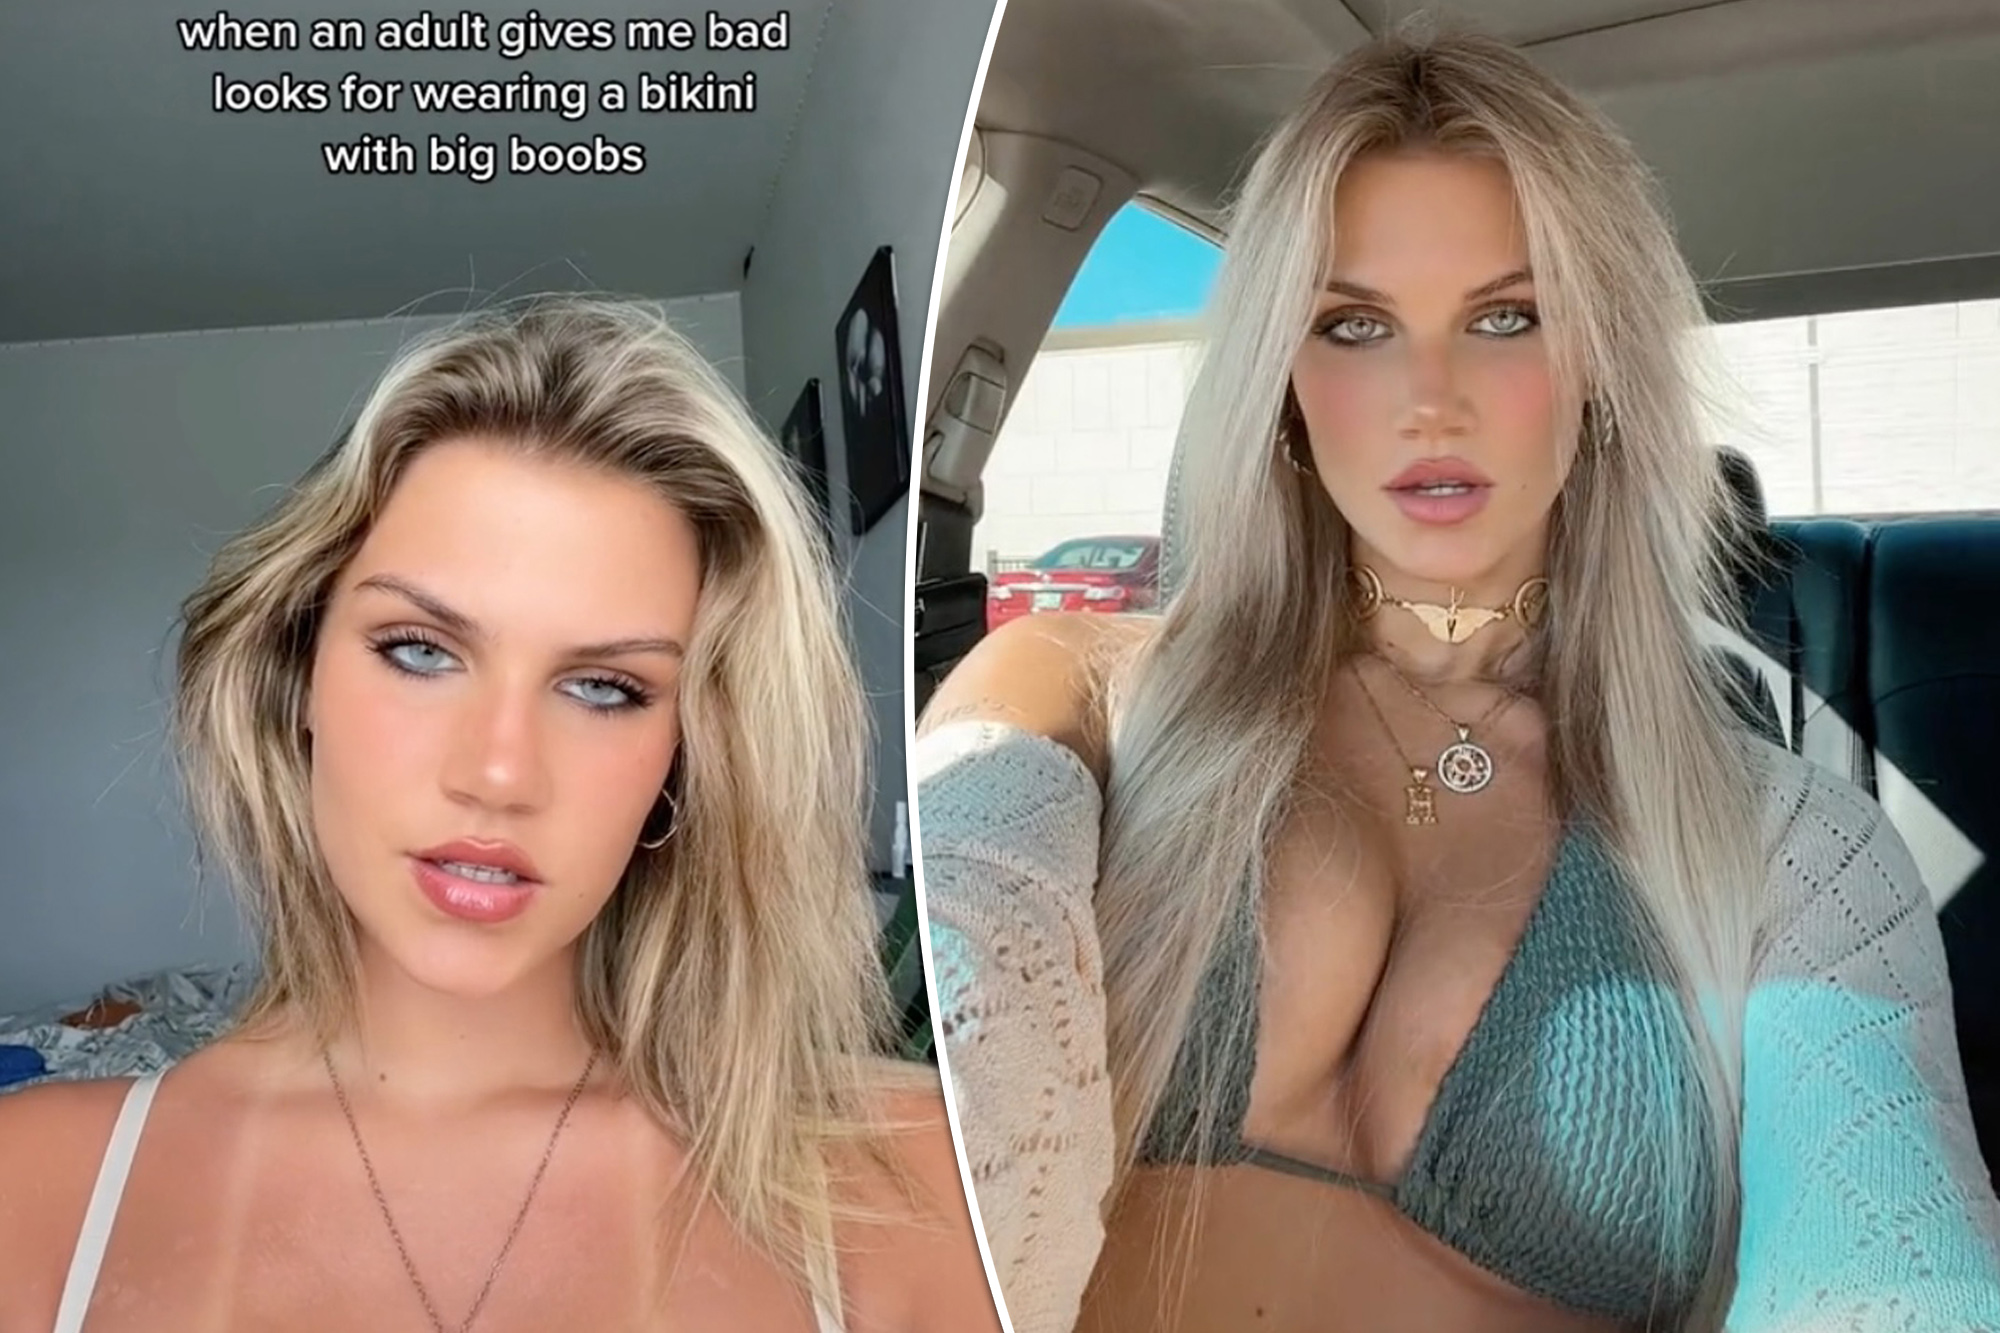 andrea danielle share sister with nice tits photos